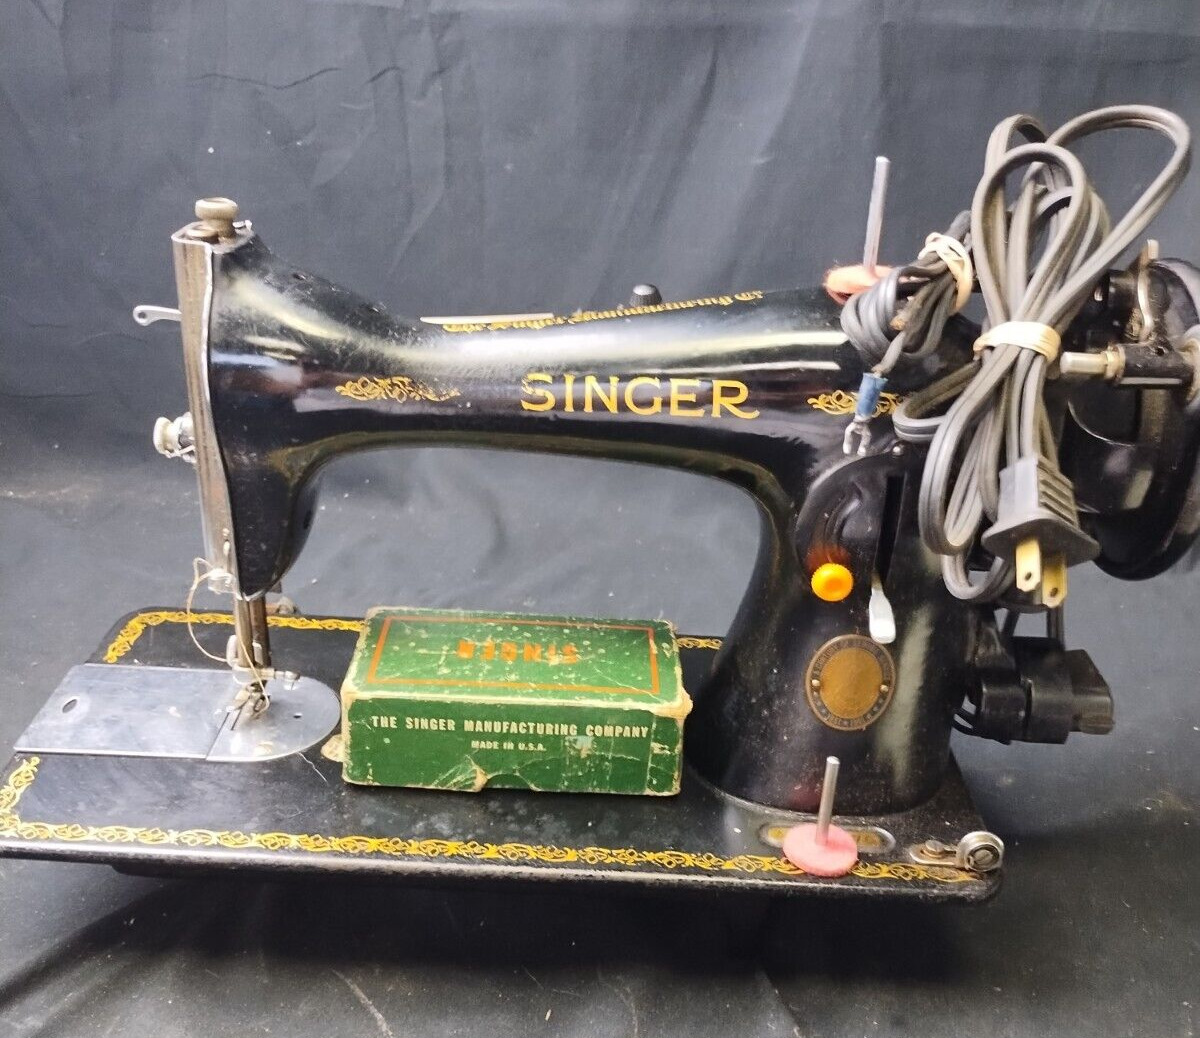 Vintage 1951 Singer Sewing Machine 1851-1951 Anniversary Tag with Accessories